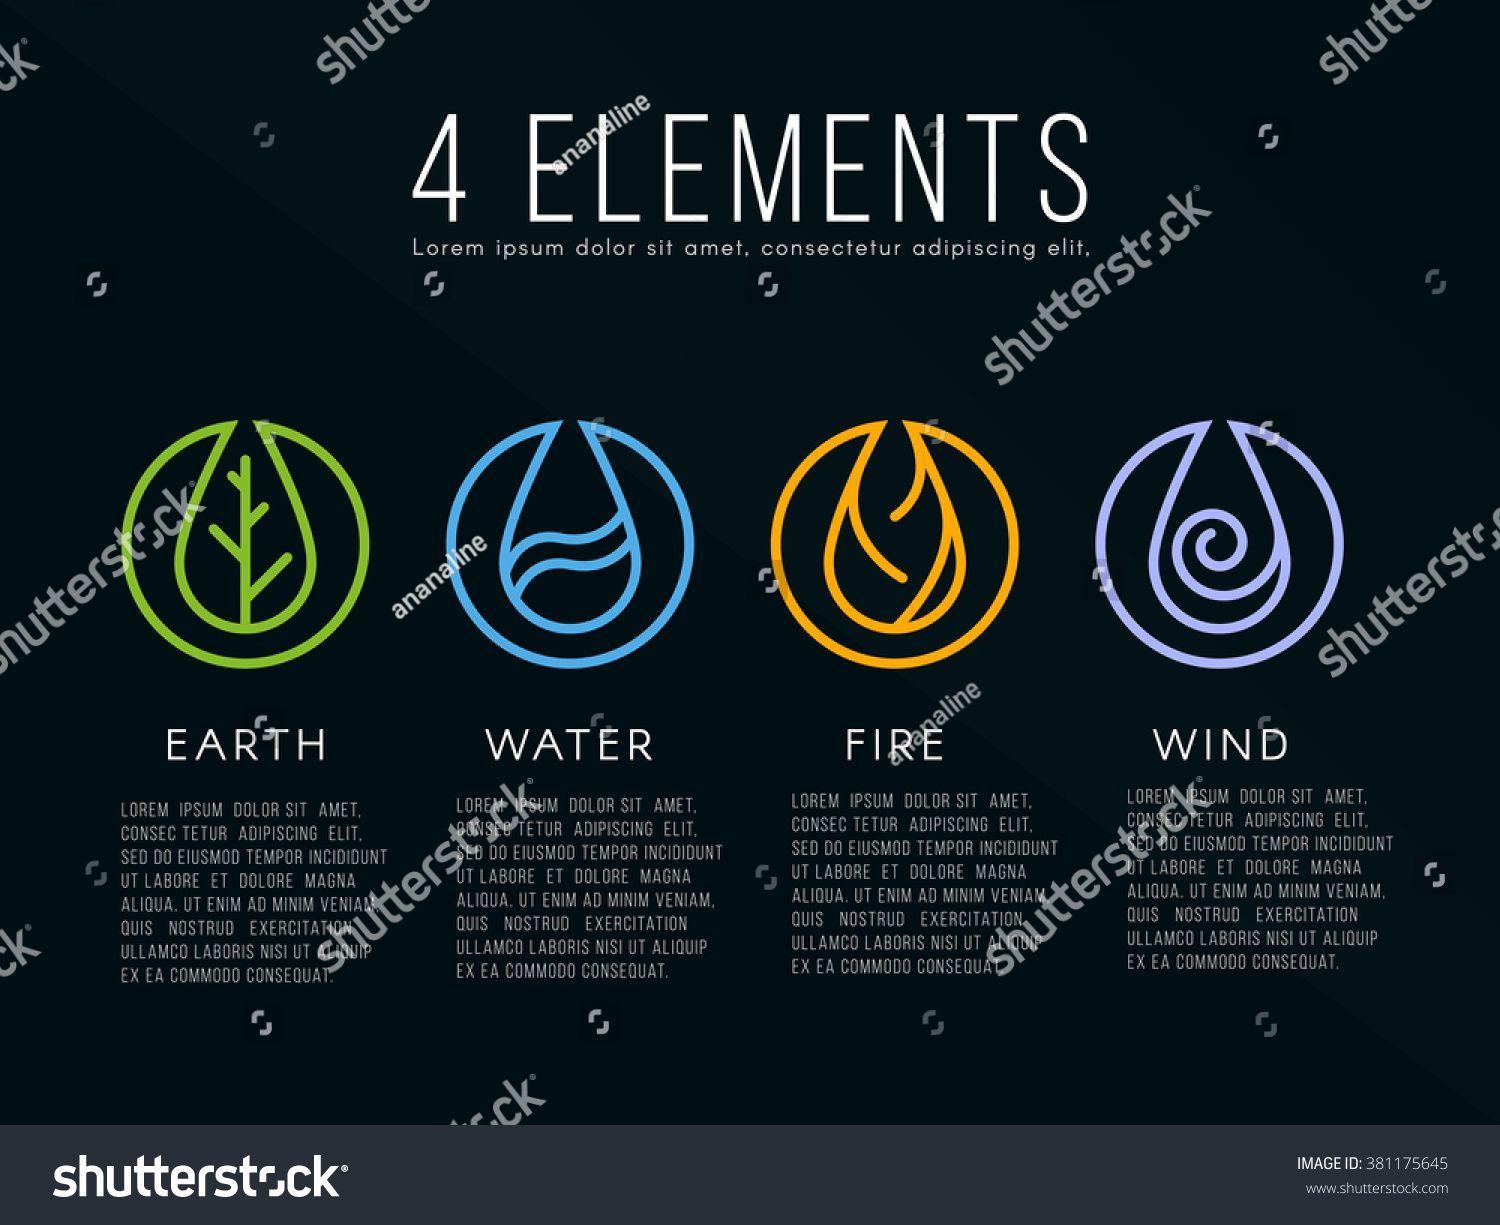 Air Element Logo - Nature 4 elements logo sign. Water, Fire, Earth, Air. on dark ...